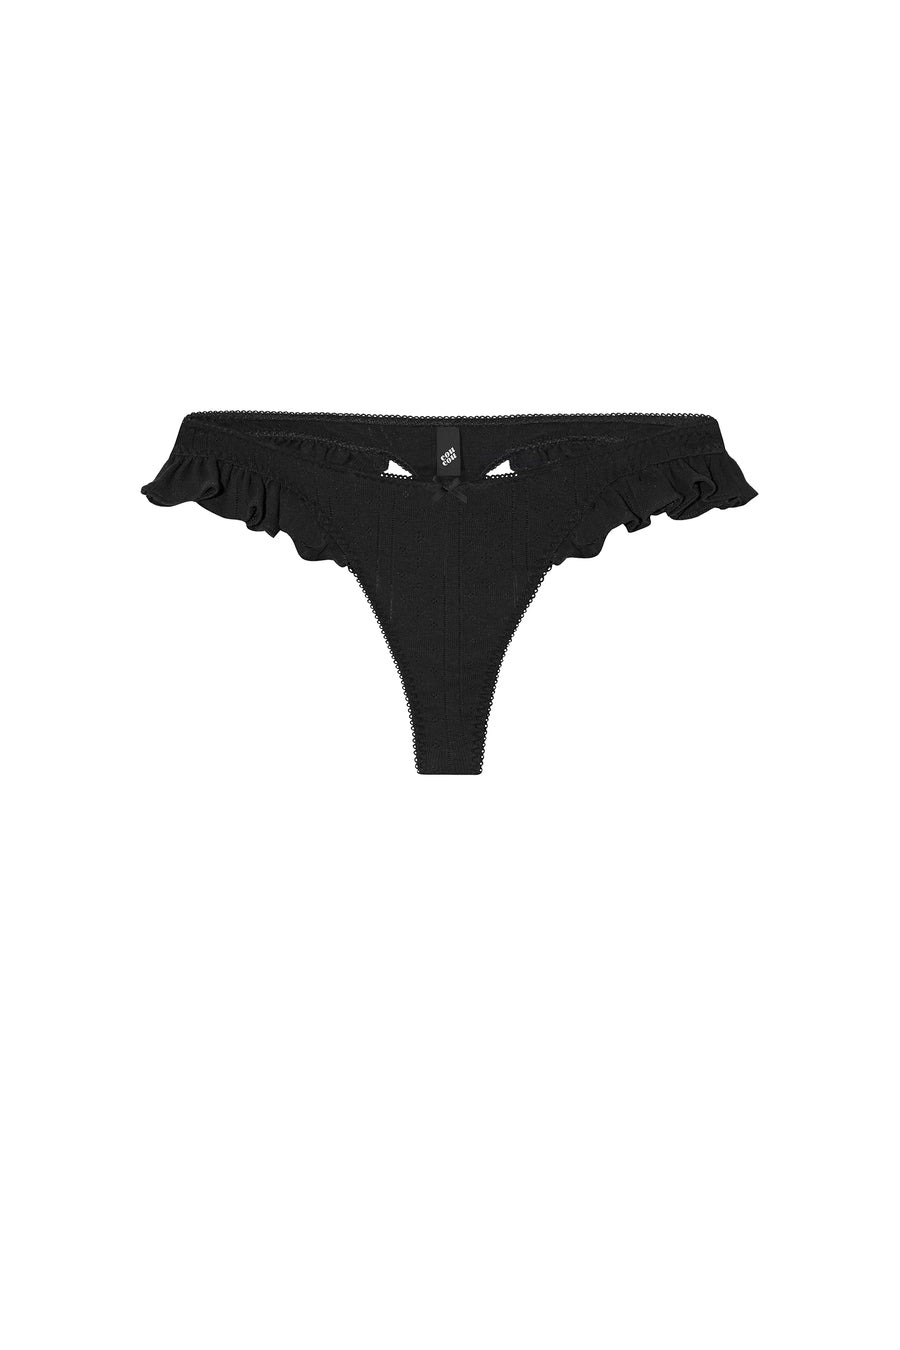 The Butterfly Thong Black – Cou Cou Intimates